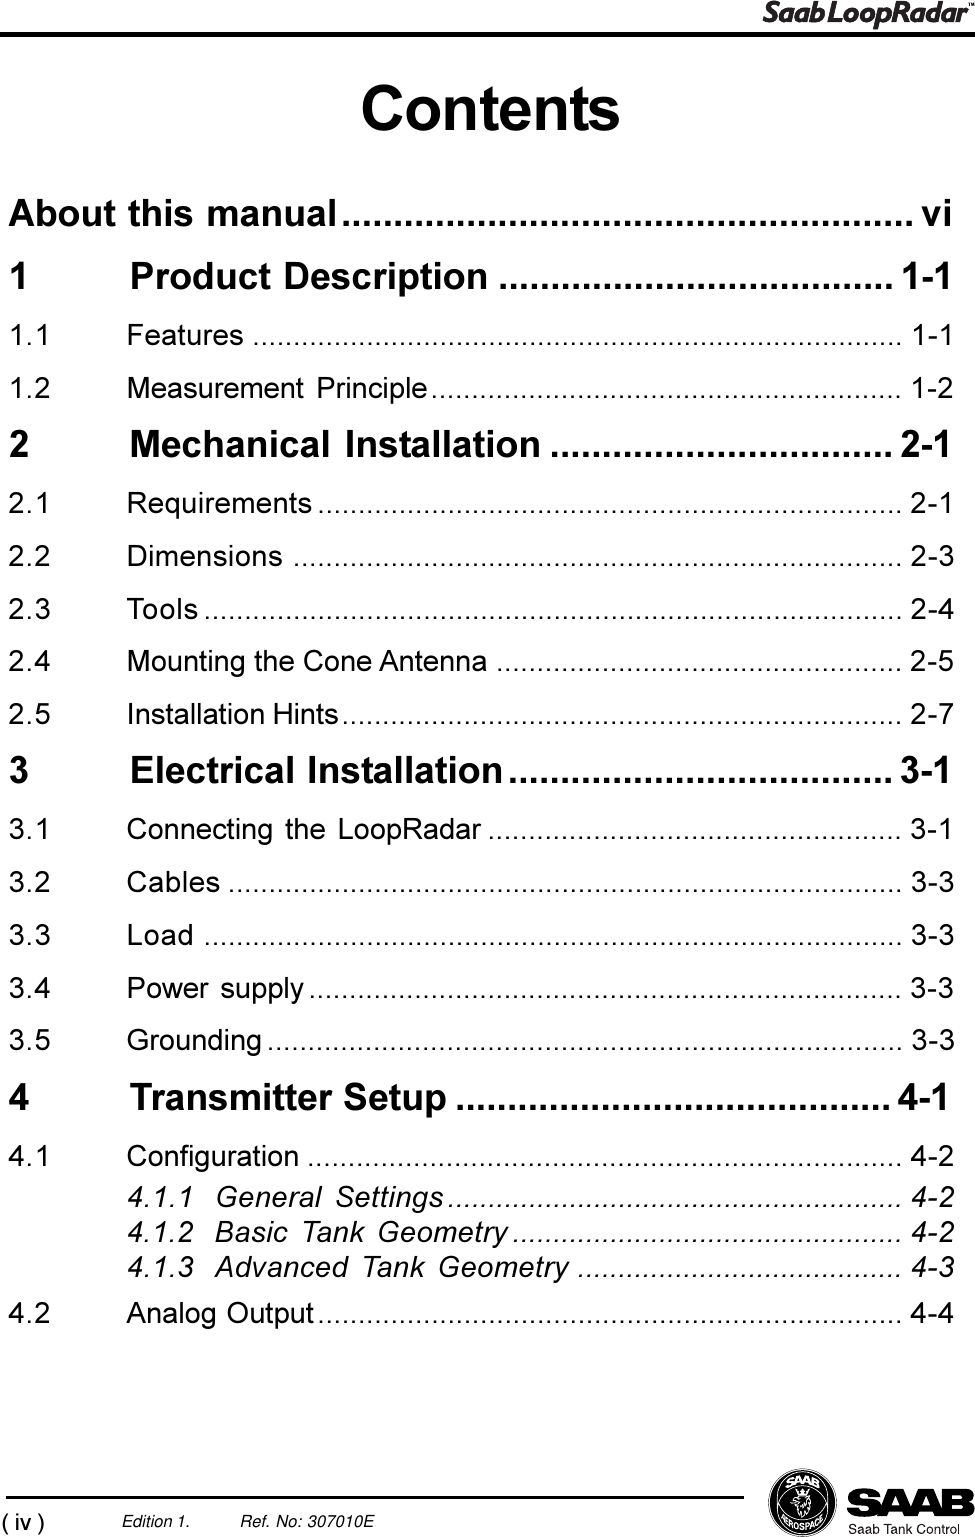 (iv)Edition 1. Ref. No: 307010EContentsAbout this manual....................................................... vi1 Product Description ...................................... 1-11.1 Features ................................................................................ 1-11.2 Measurement Principle.......................................................... 1-22 Mechanical Installation ................................. 2-12.1 Requirements ........................................................................ 2-12.2 Dimensions ........................................................................... 2-32.3 Tools ...................................................................................... 2-42.4 Mounting the Cone Antenna .................................................. 2-52.5 Installation Hints..................................................................... 2-73 Electrical Installation..................................... 3-13.1 Connecting the LoopRadar ................................................... 3-13.2 Cables ................................................................................... 3-33.3 Load ...................................................................................... 3-33.4 Power supply ......................................................................... 3-33.5 Grounding .............................................................................. 3-34 Transmitter Setup .......................................... 4-14.1 Configuration ......................................................................... 4-24.1.1 General Settings ........................................................ 4-24.1.2 Basic Tank Geometry ................................................ 4-24.1.3 Advanced Tank Geometry ........................................ 4-34.2 Analog Output........................................................................ 4-4